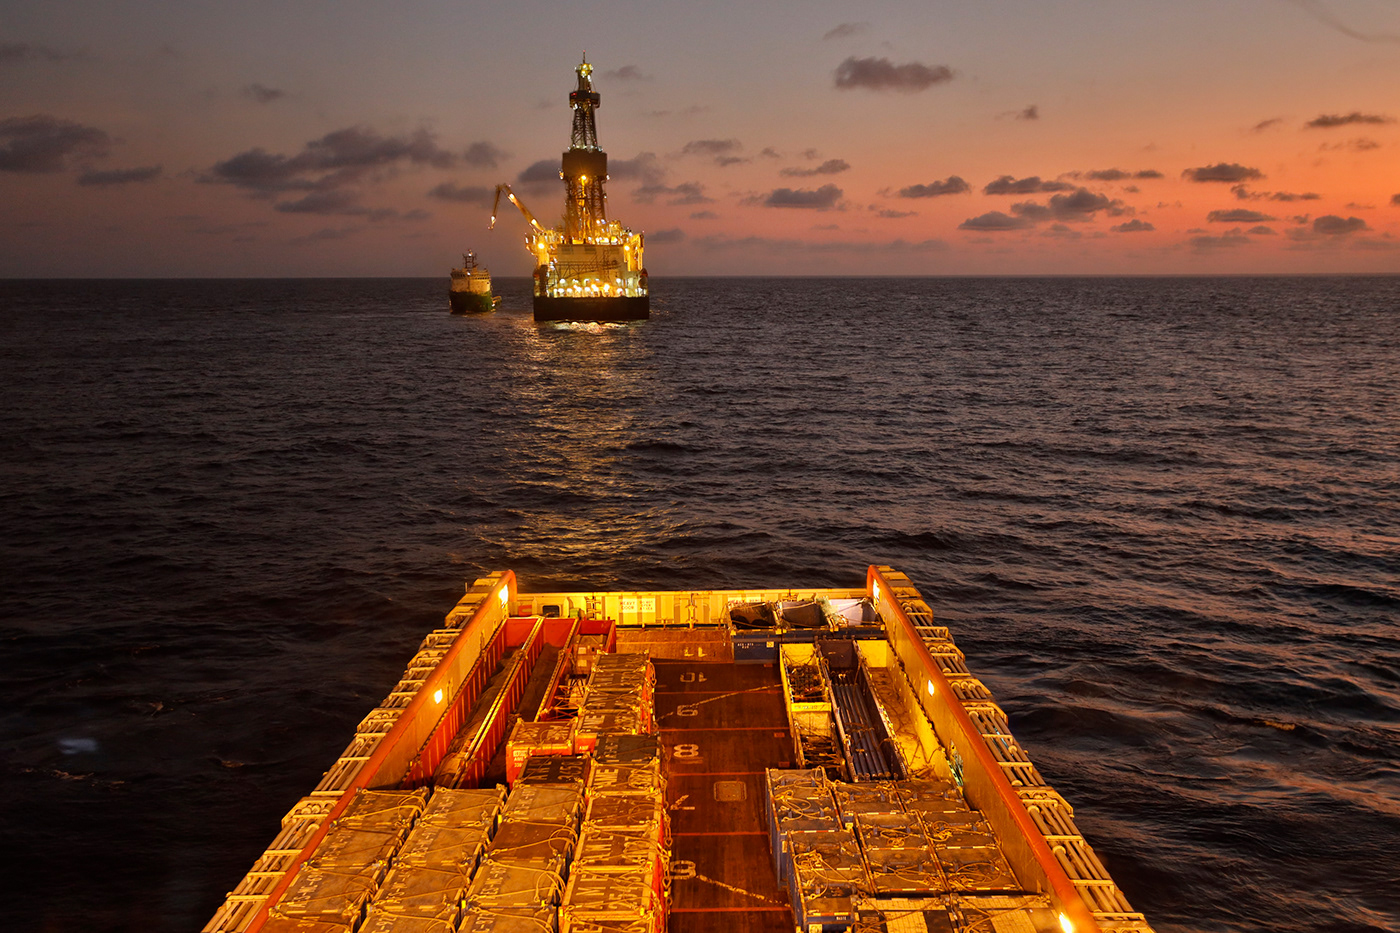 offshore vessel oil industry people captain angola bourbon rig West Africa